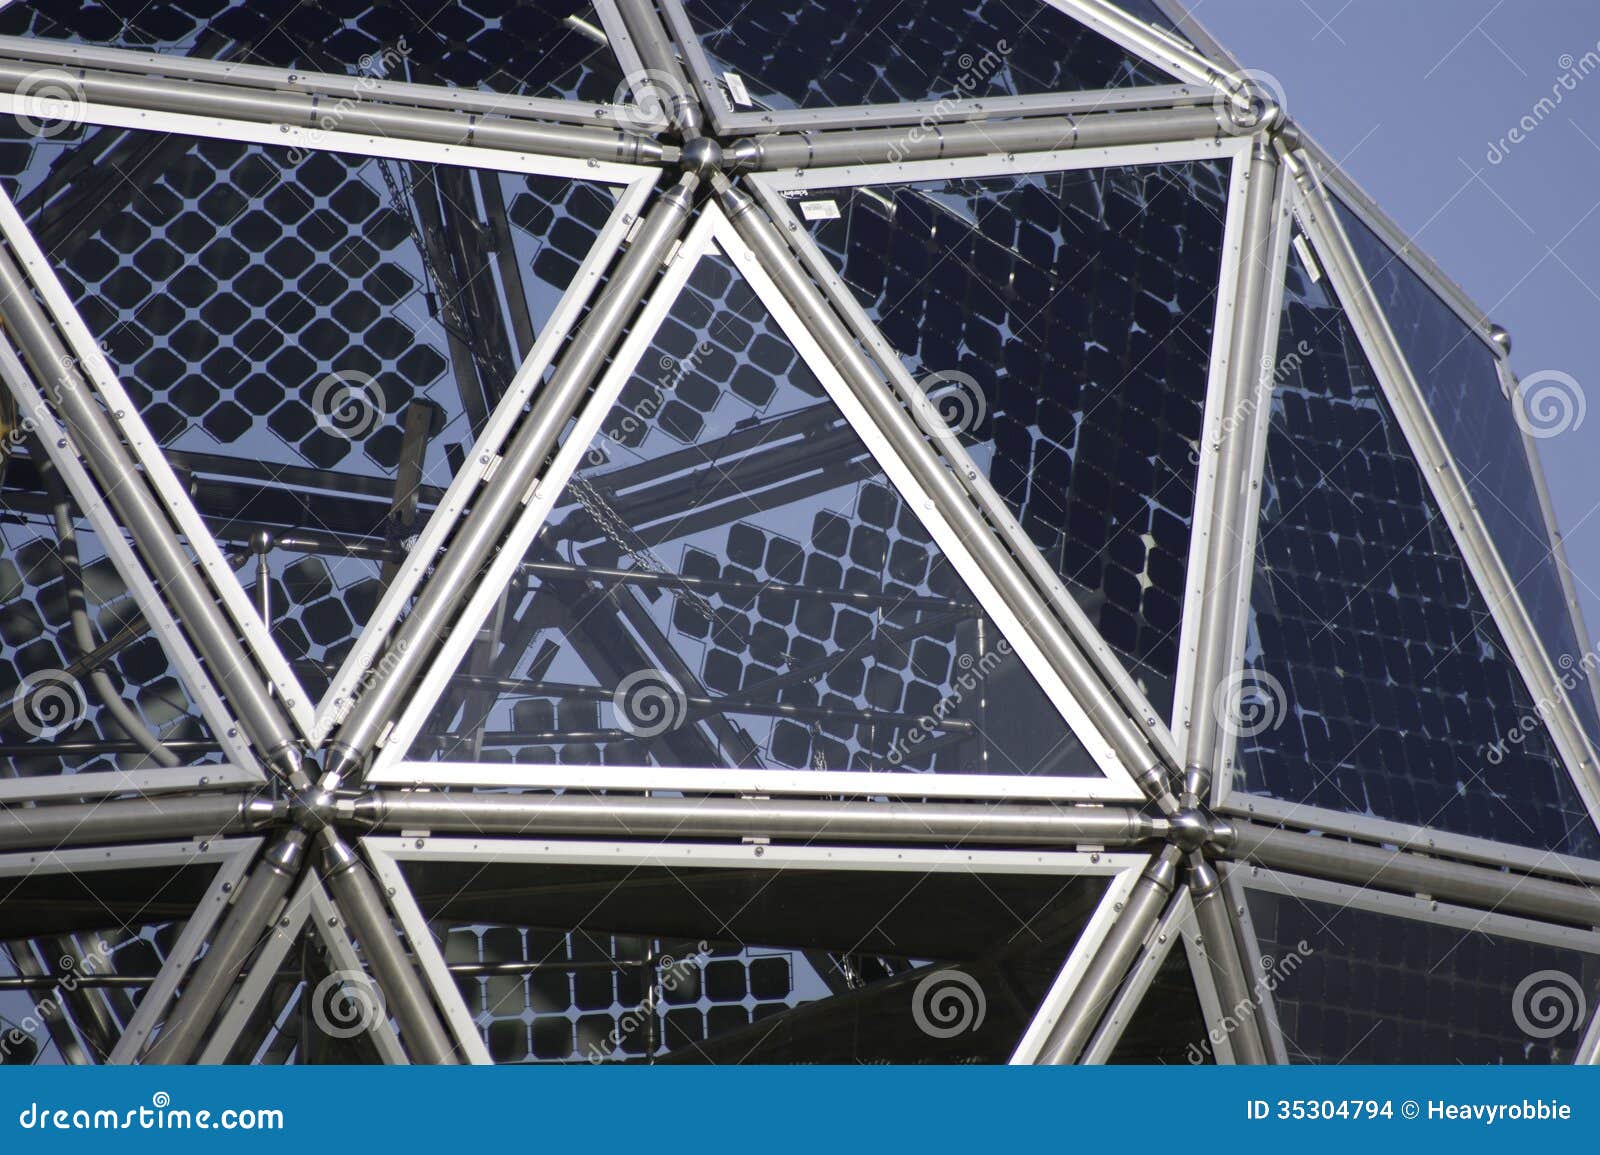 Innovative Photovoltaic Panel System Stock Photo - Image of panel ...